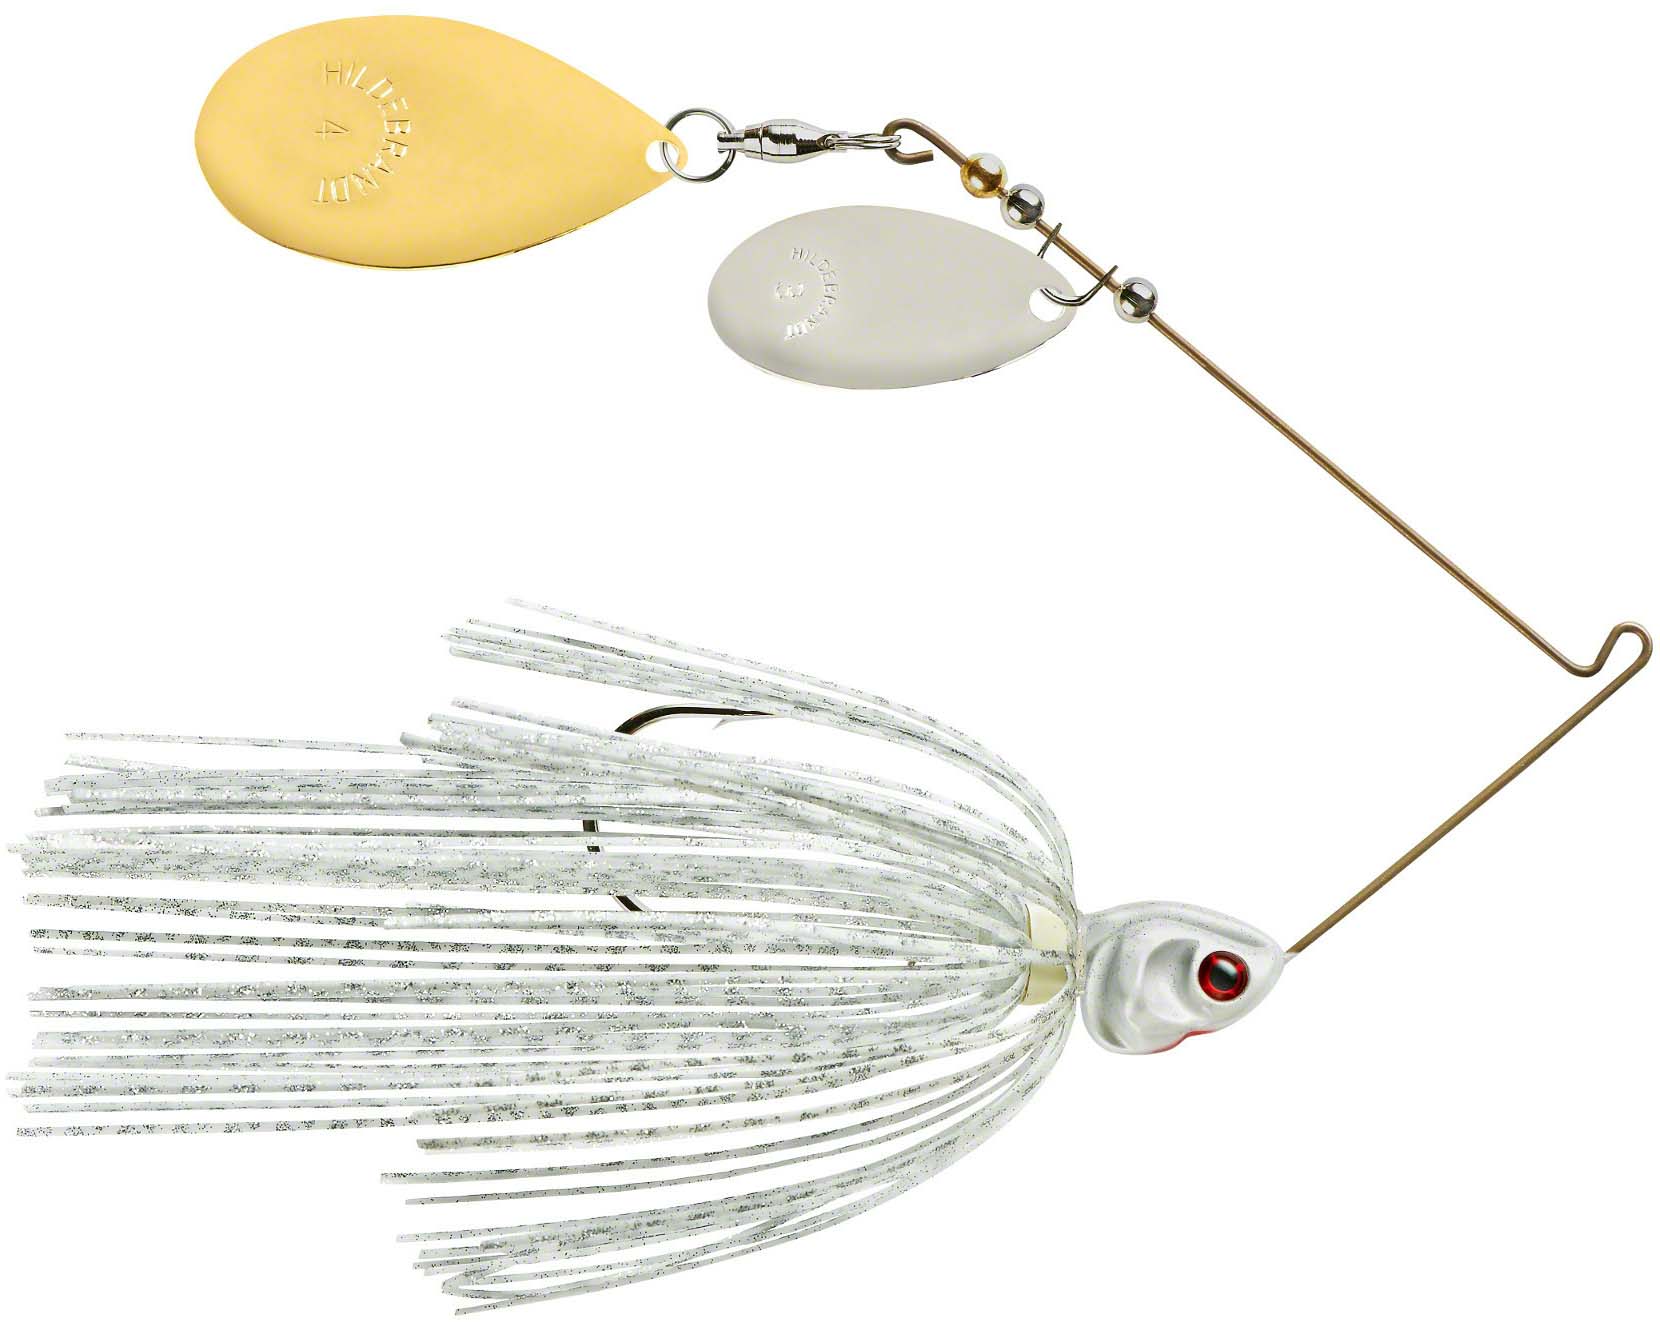 Booyah J.C. Covert Series Double Indiana Spinnerbait Fishing Hook